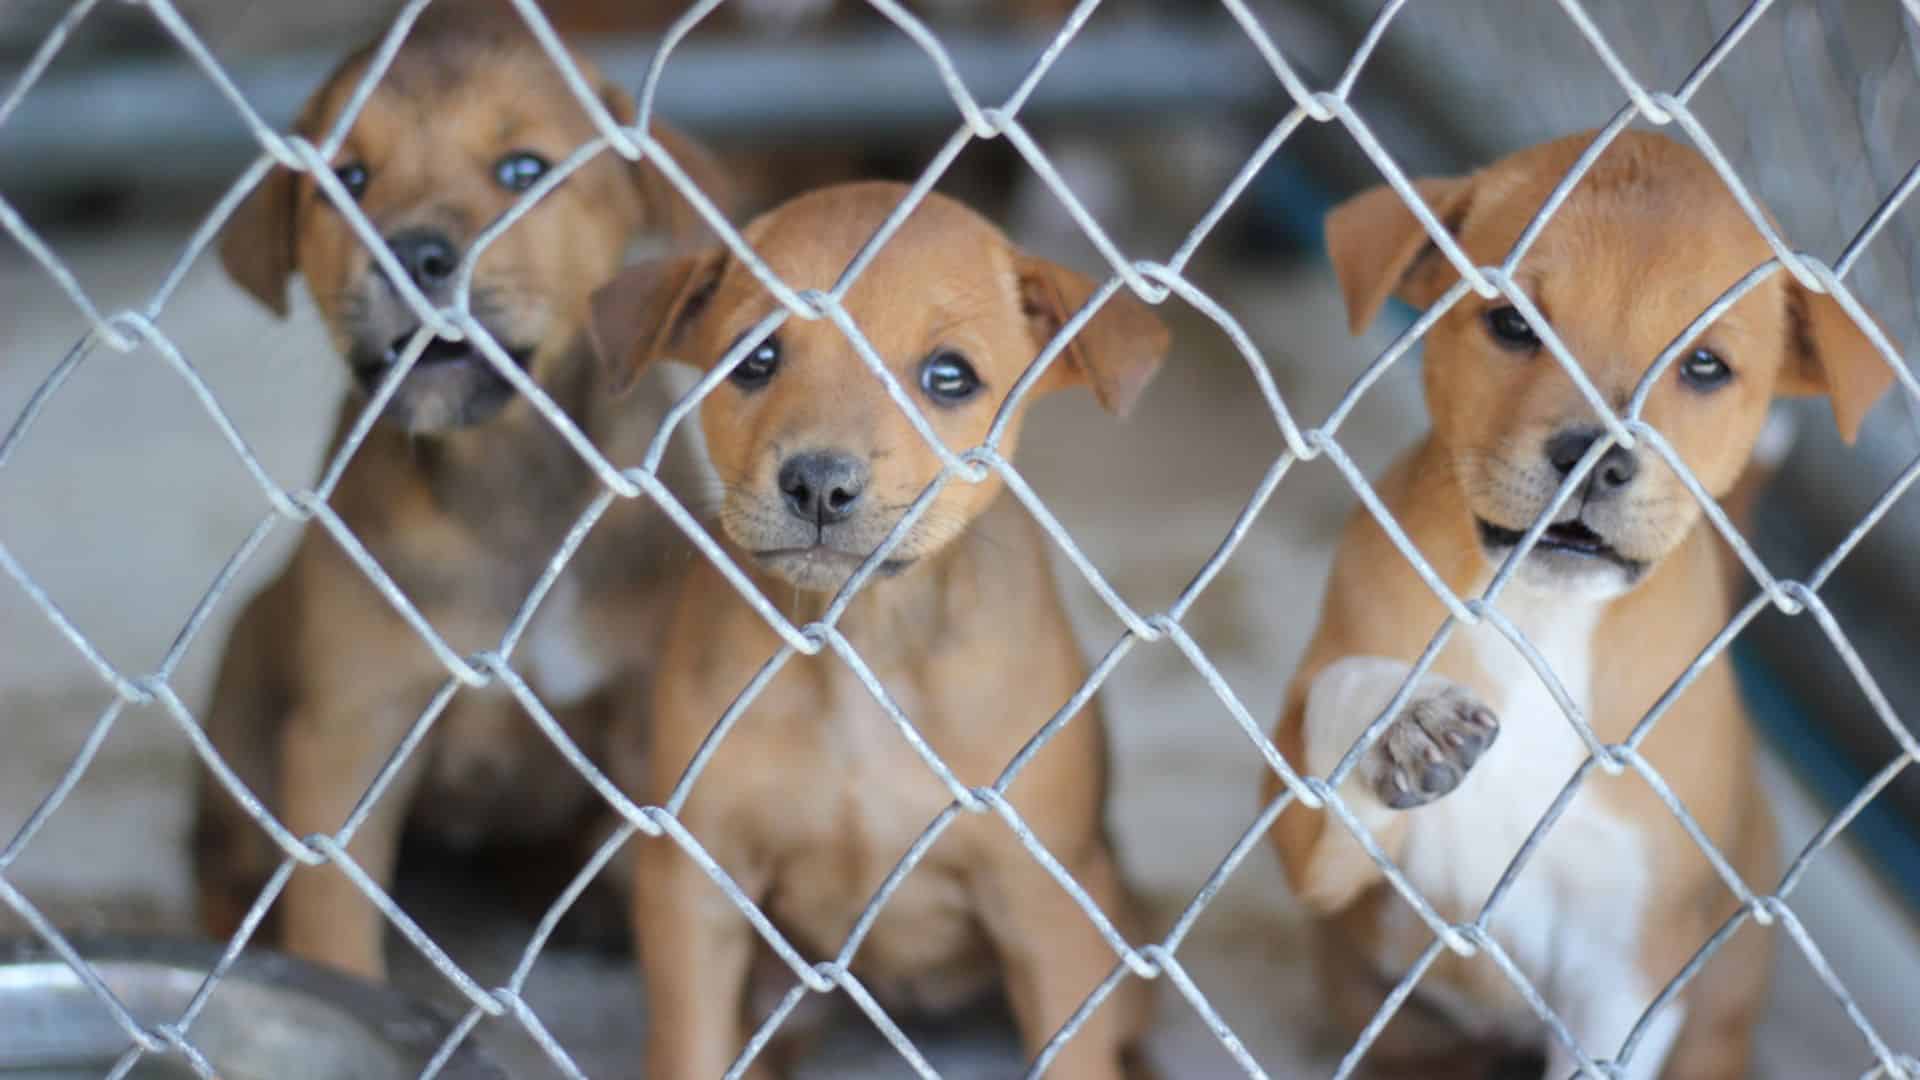 NO To Puppy Mills: Another U.S. City Joins The List Of Places That Ban Selling Pets